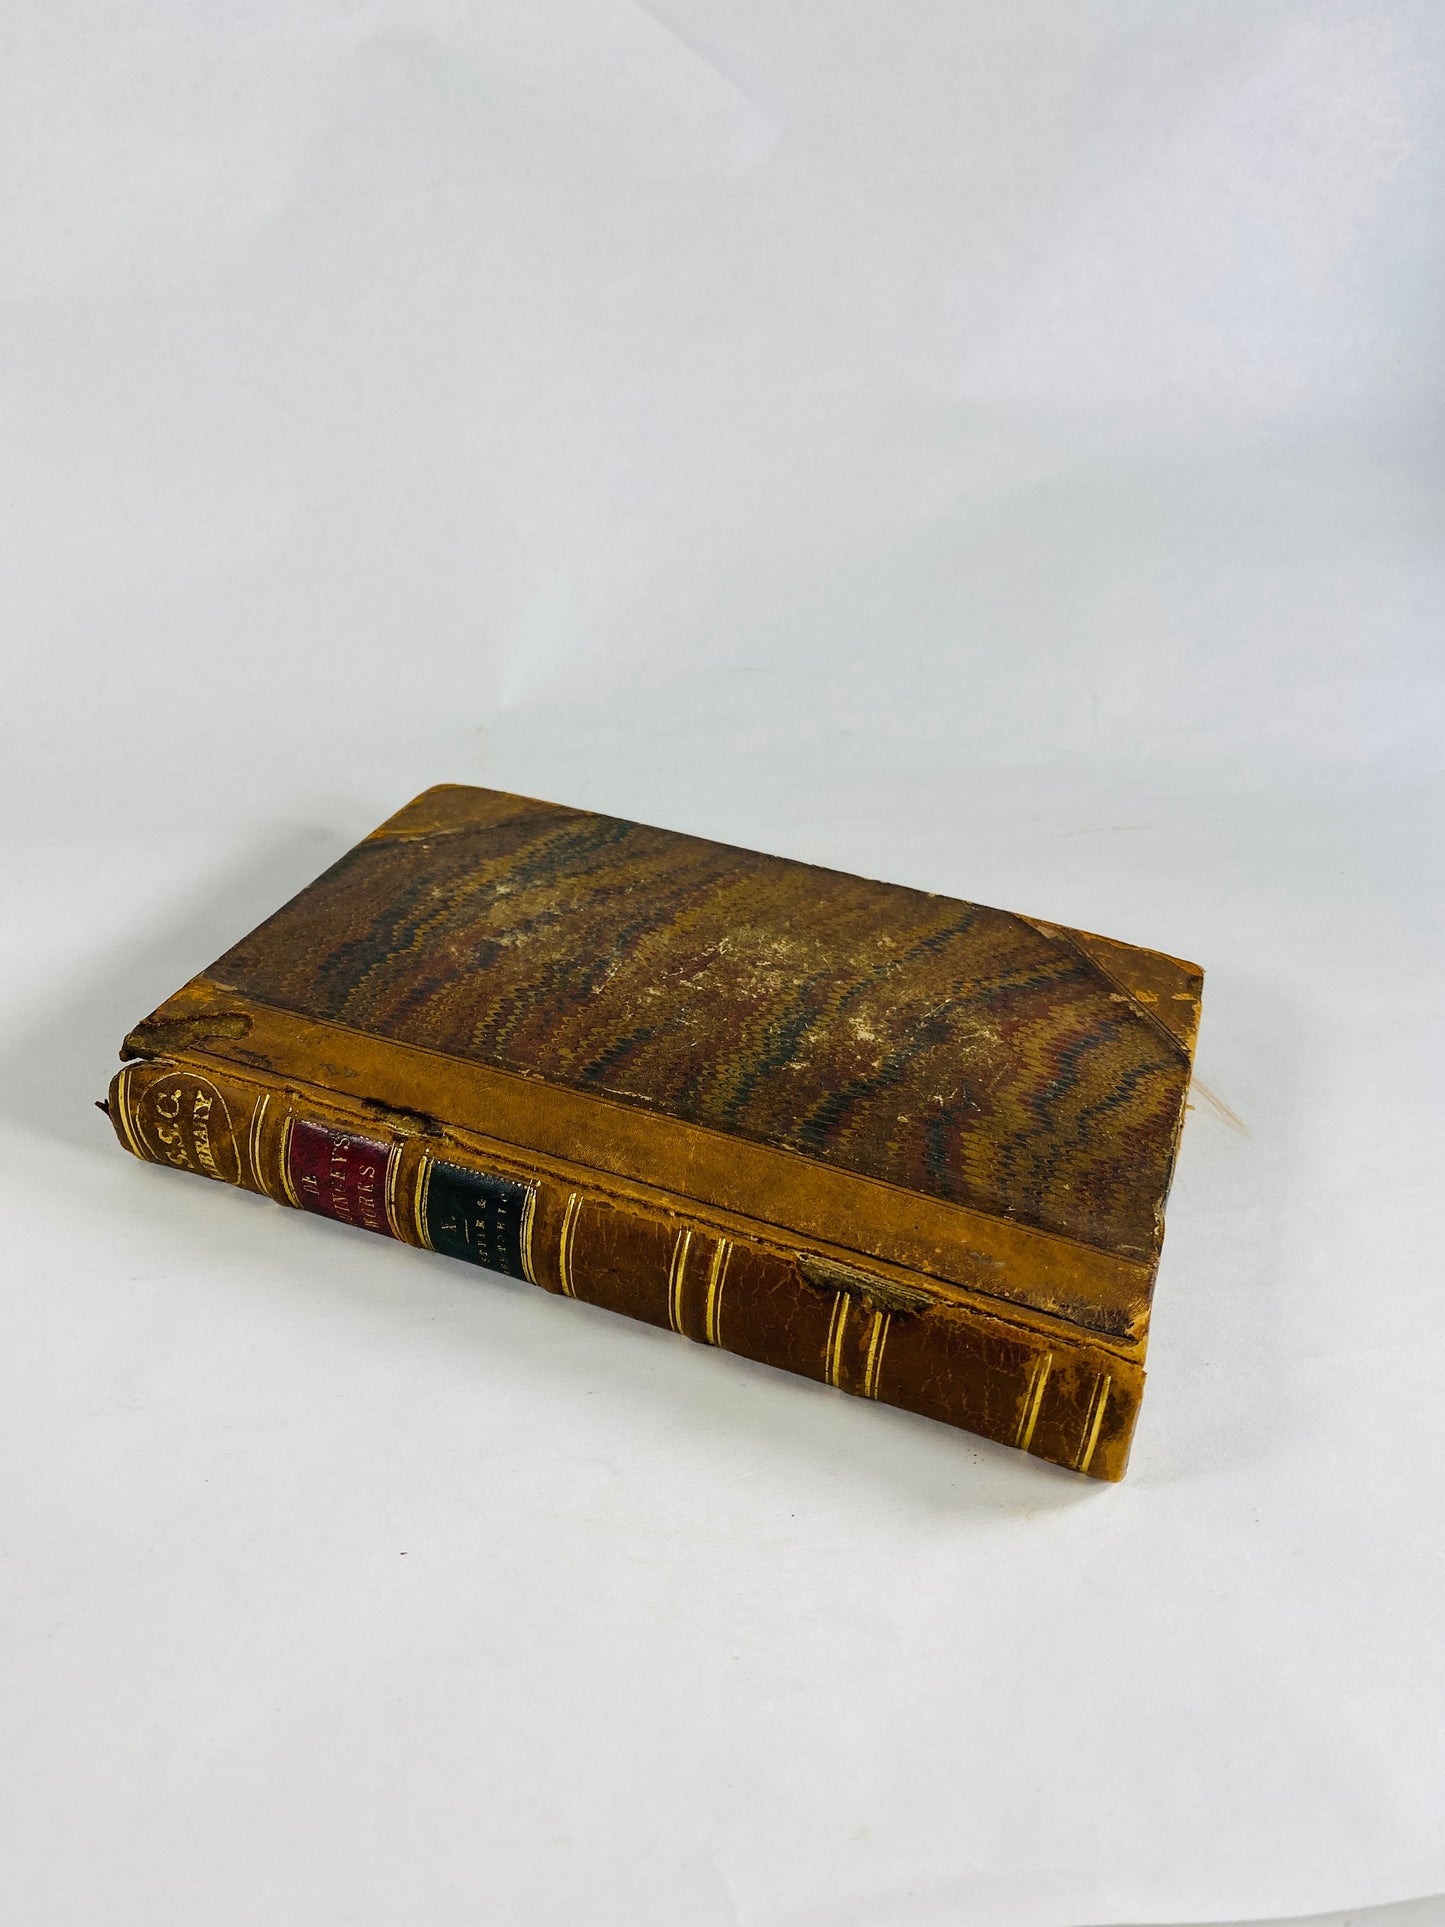 1862 Style And Rhetoric by Thomas De Quincey, author of Confessions of an English Opium-Eater antique book vintage vol X